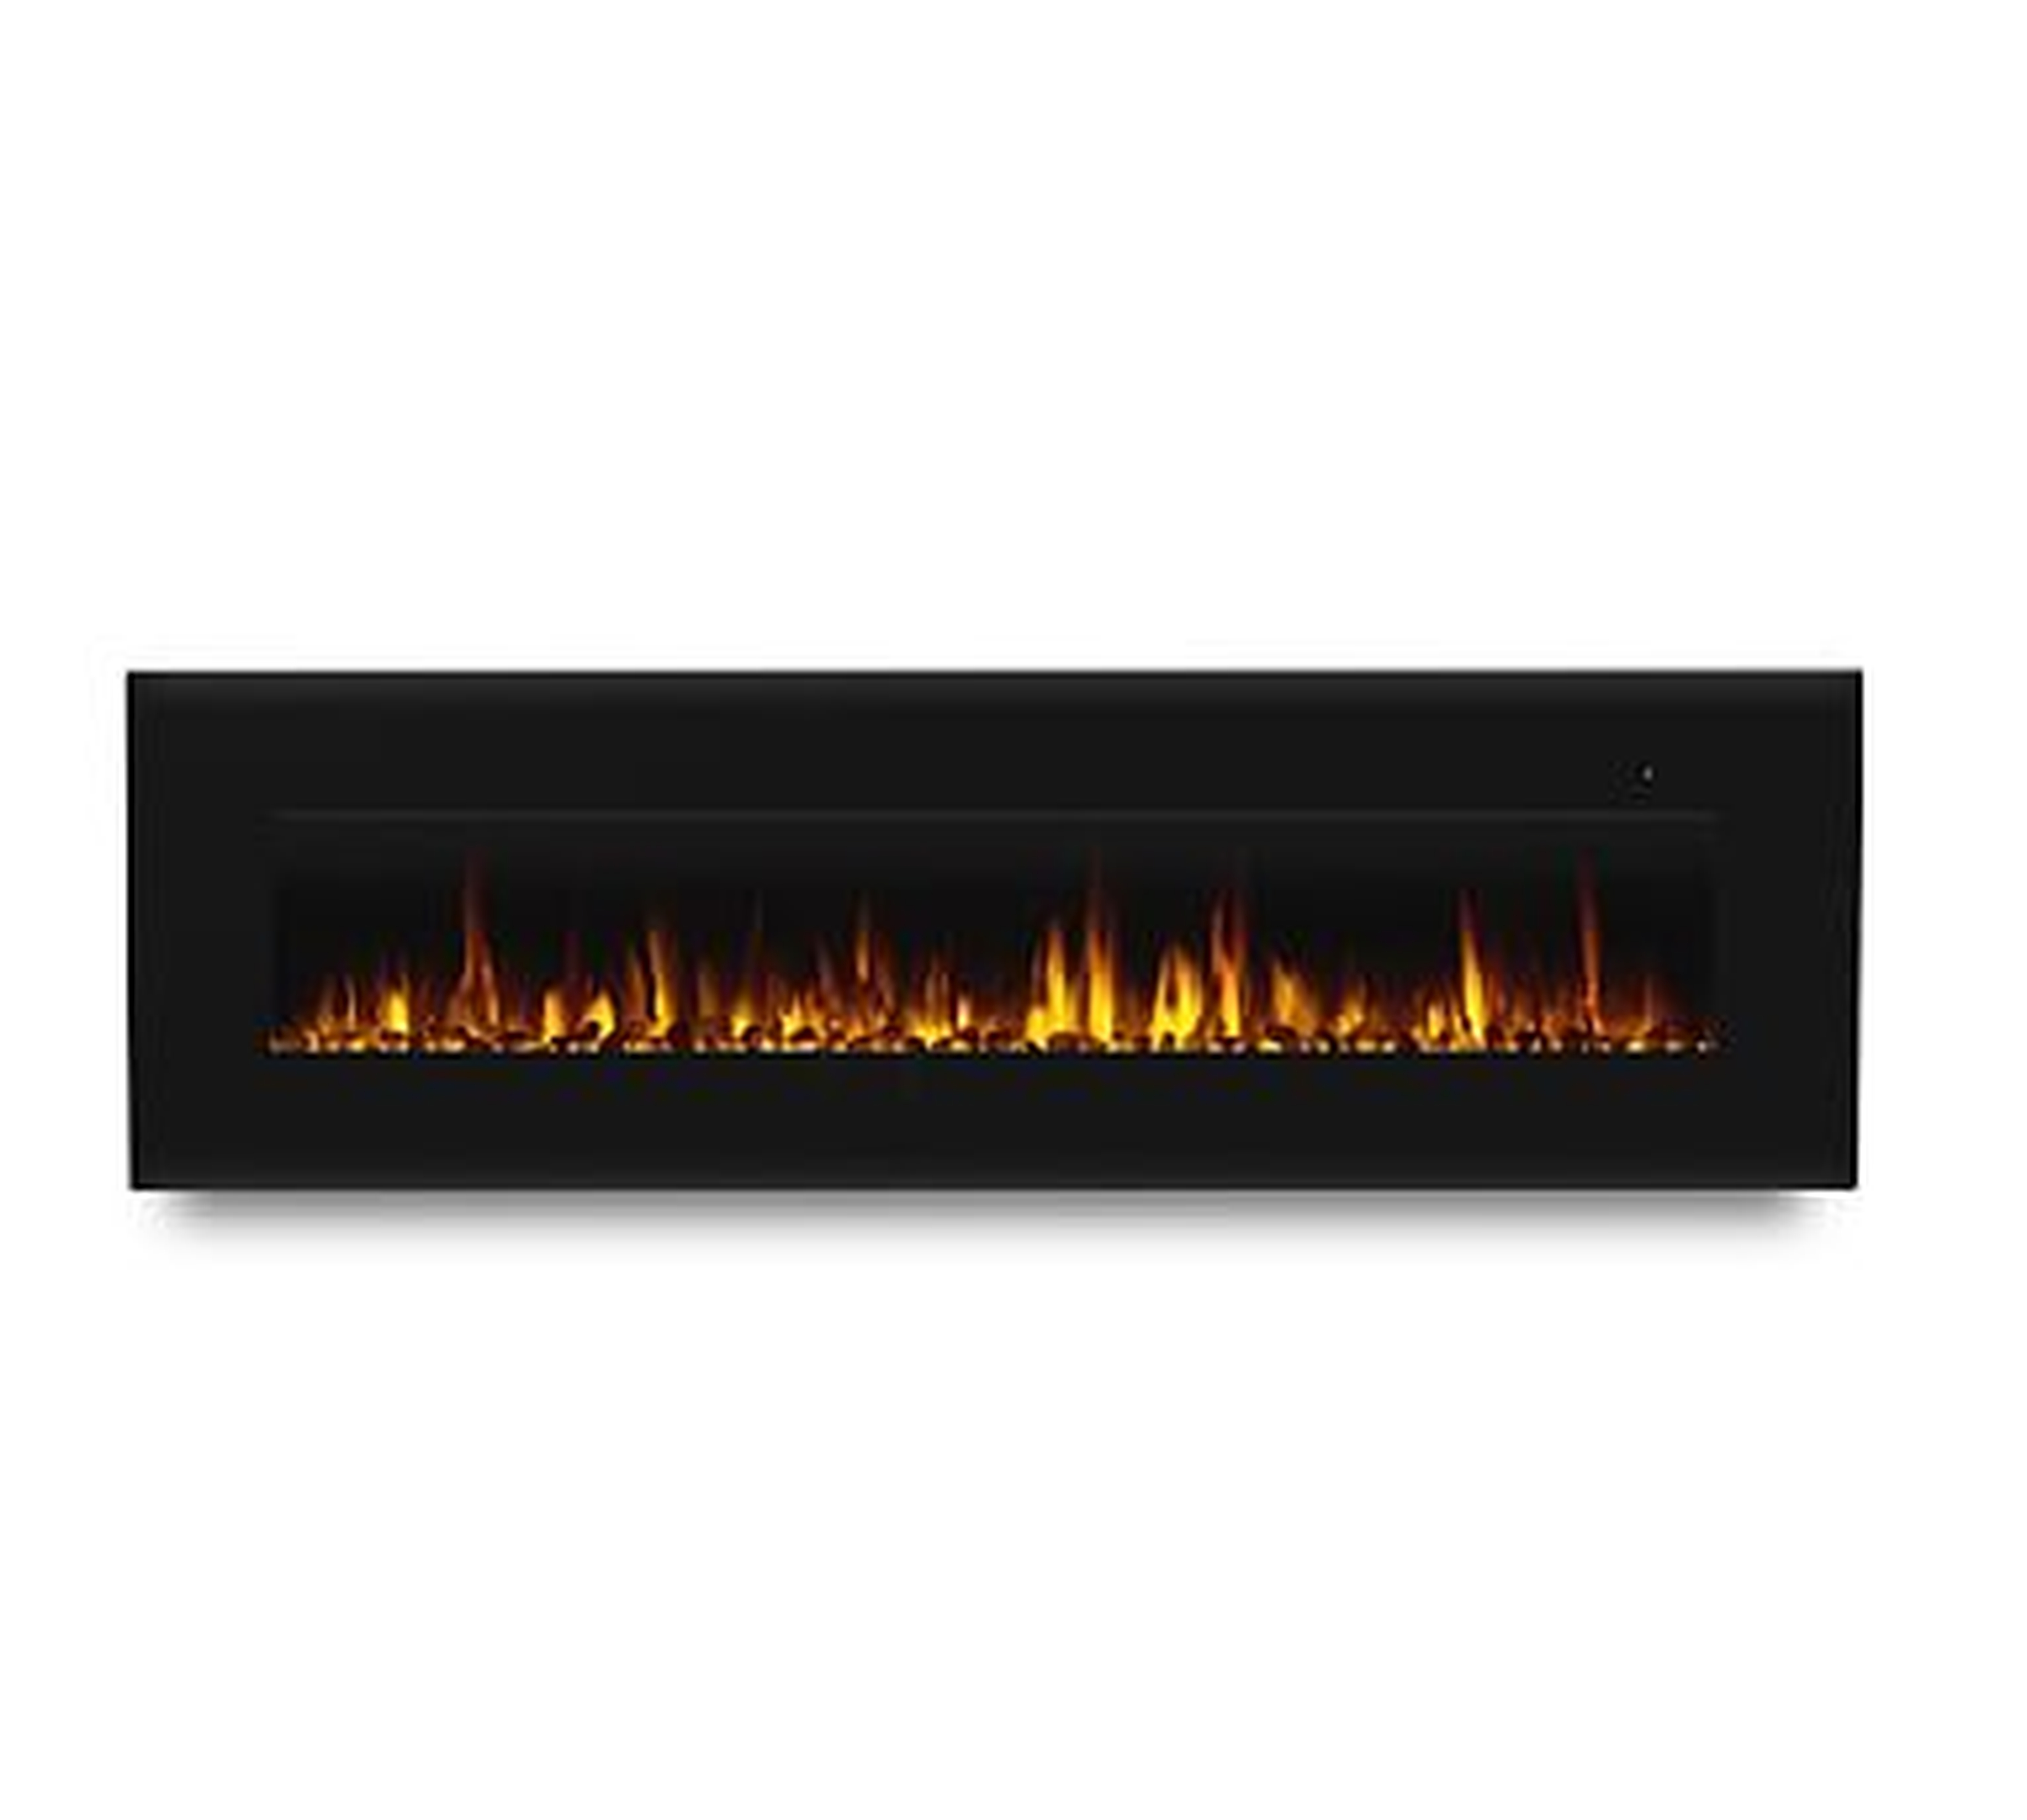 Clay Electric Wall Fireplace, Black - Pottery Barn